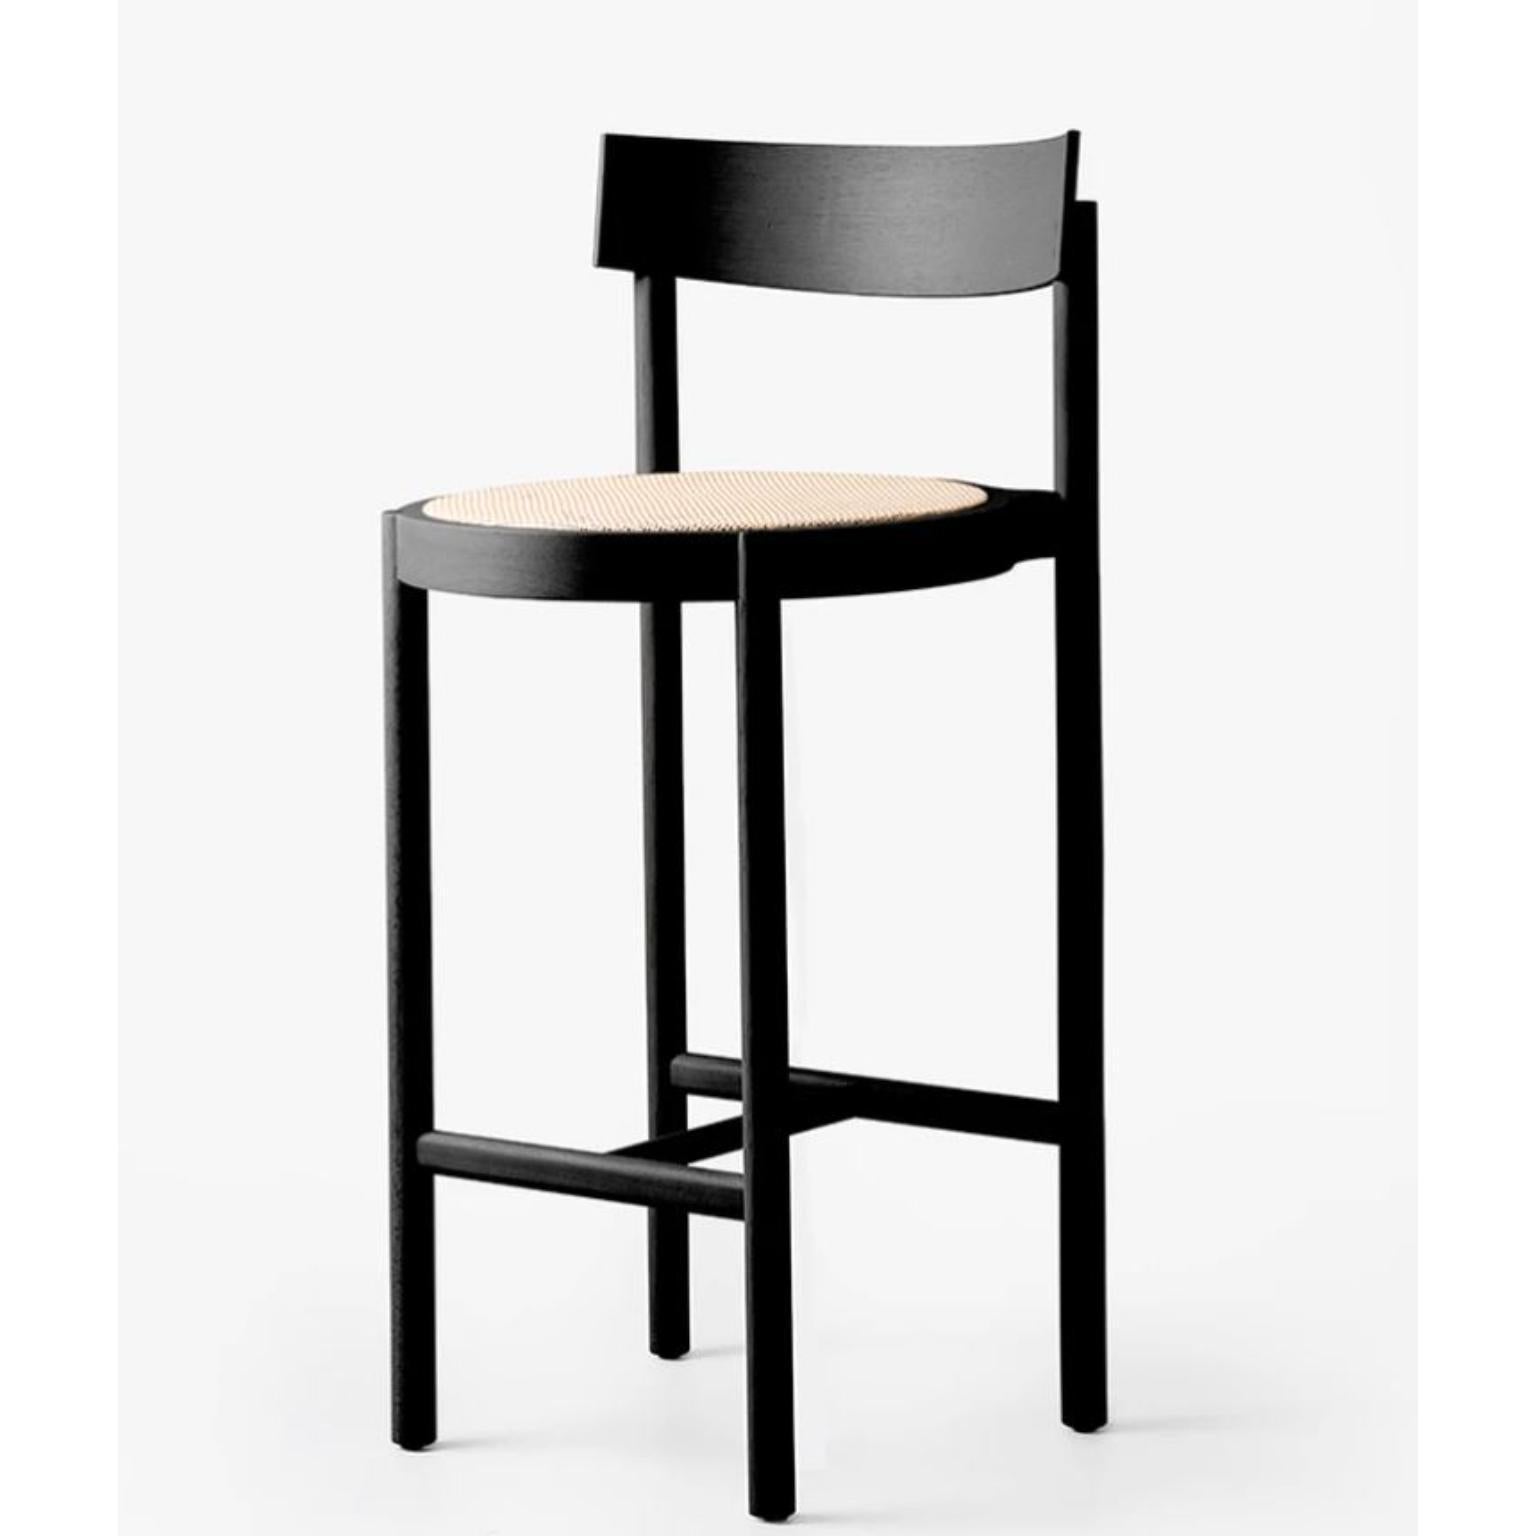 Black Gravatá Bar Stool by Wentz
Dimensions: D 52 x W 47 x H 100 cm
Materials: Tauari Wood, Cane/Upholstery.
Weight: 4,7kg / 10,4 lbs

The Gravatá series synthesizes our vision regarding the functional and visual simplicity of furniture. Through